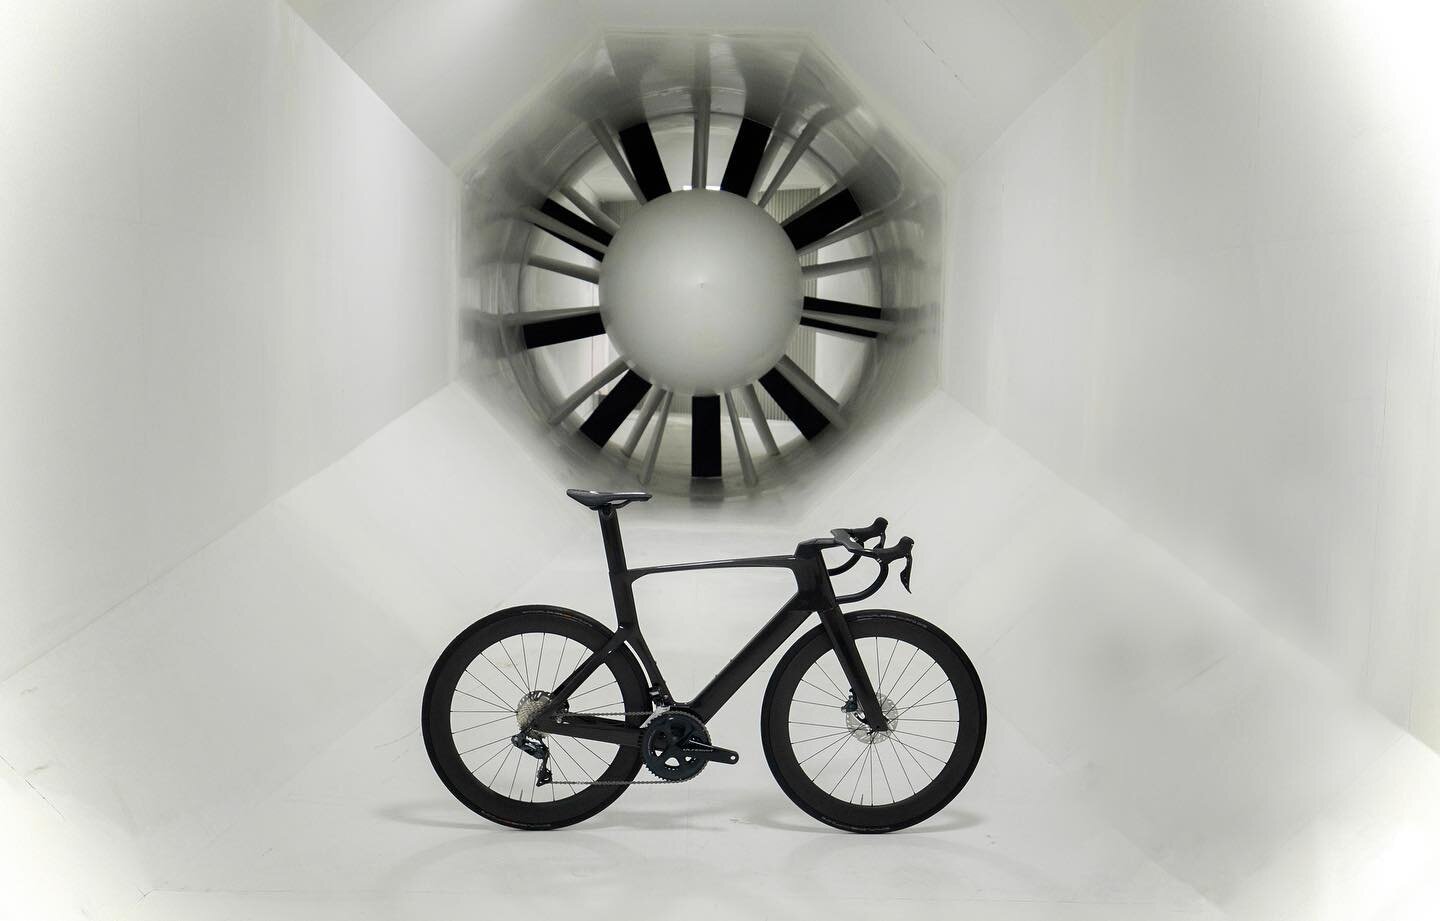 Something a little different from the usual. Was really stoked to be part of the launch for the all-new @bikeonscott Foil RC. Definitely a change in scenery shooting in a wind tunnel! 💨 

#roadbiking #roadcycling #cyclinglife #cycling #roadbike